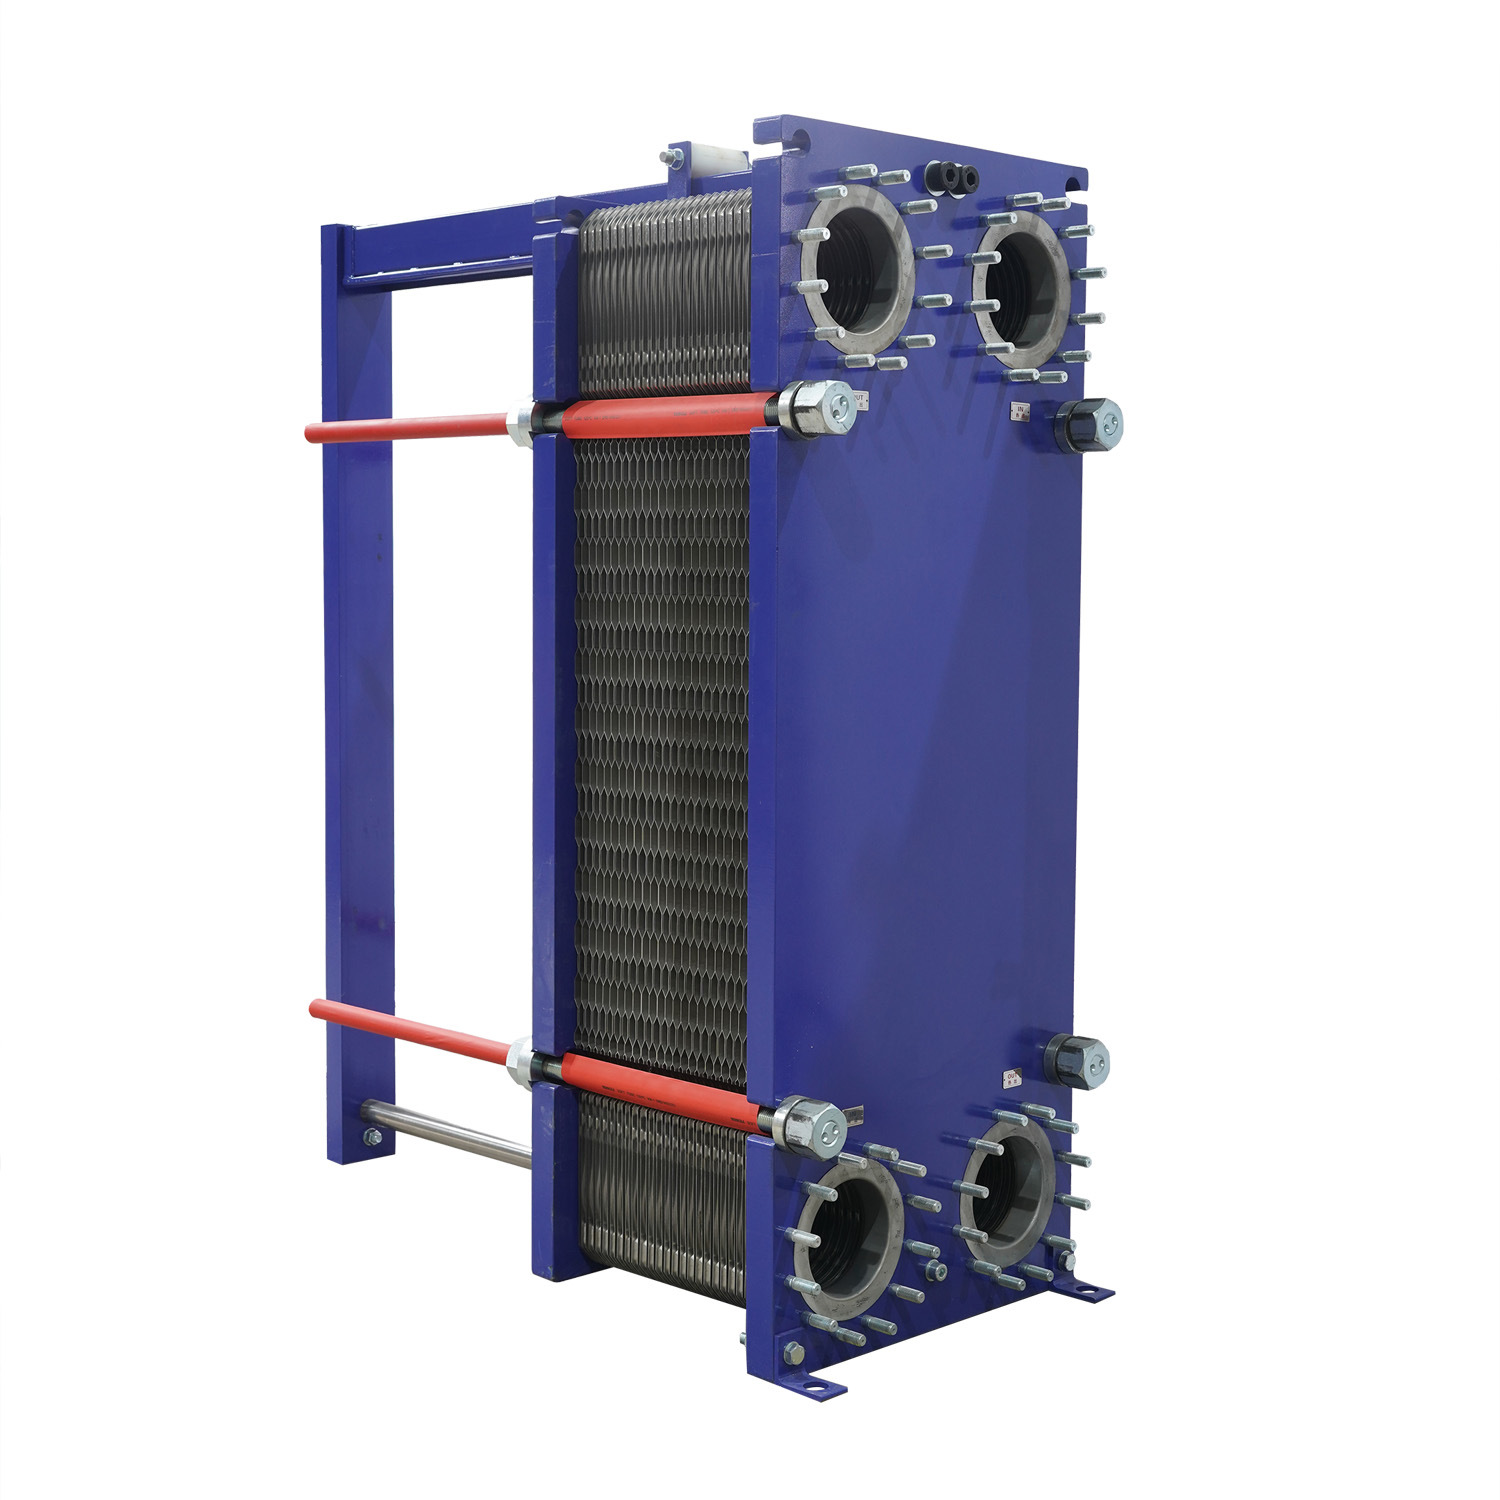 Application of plate heat exchanger in paper industry